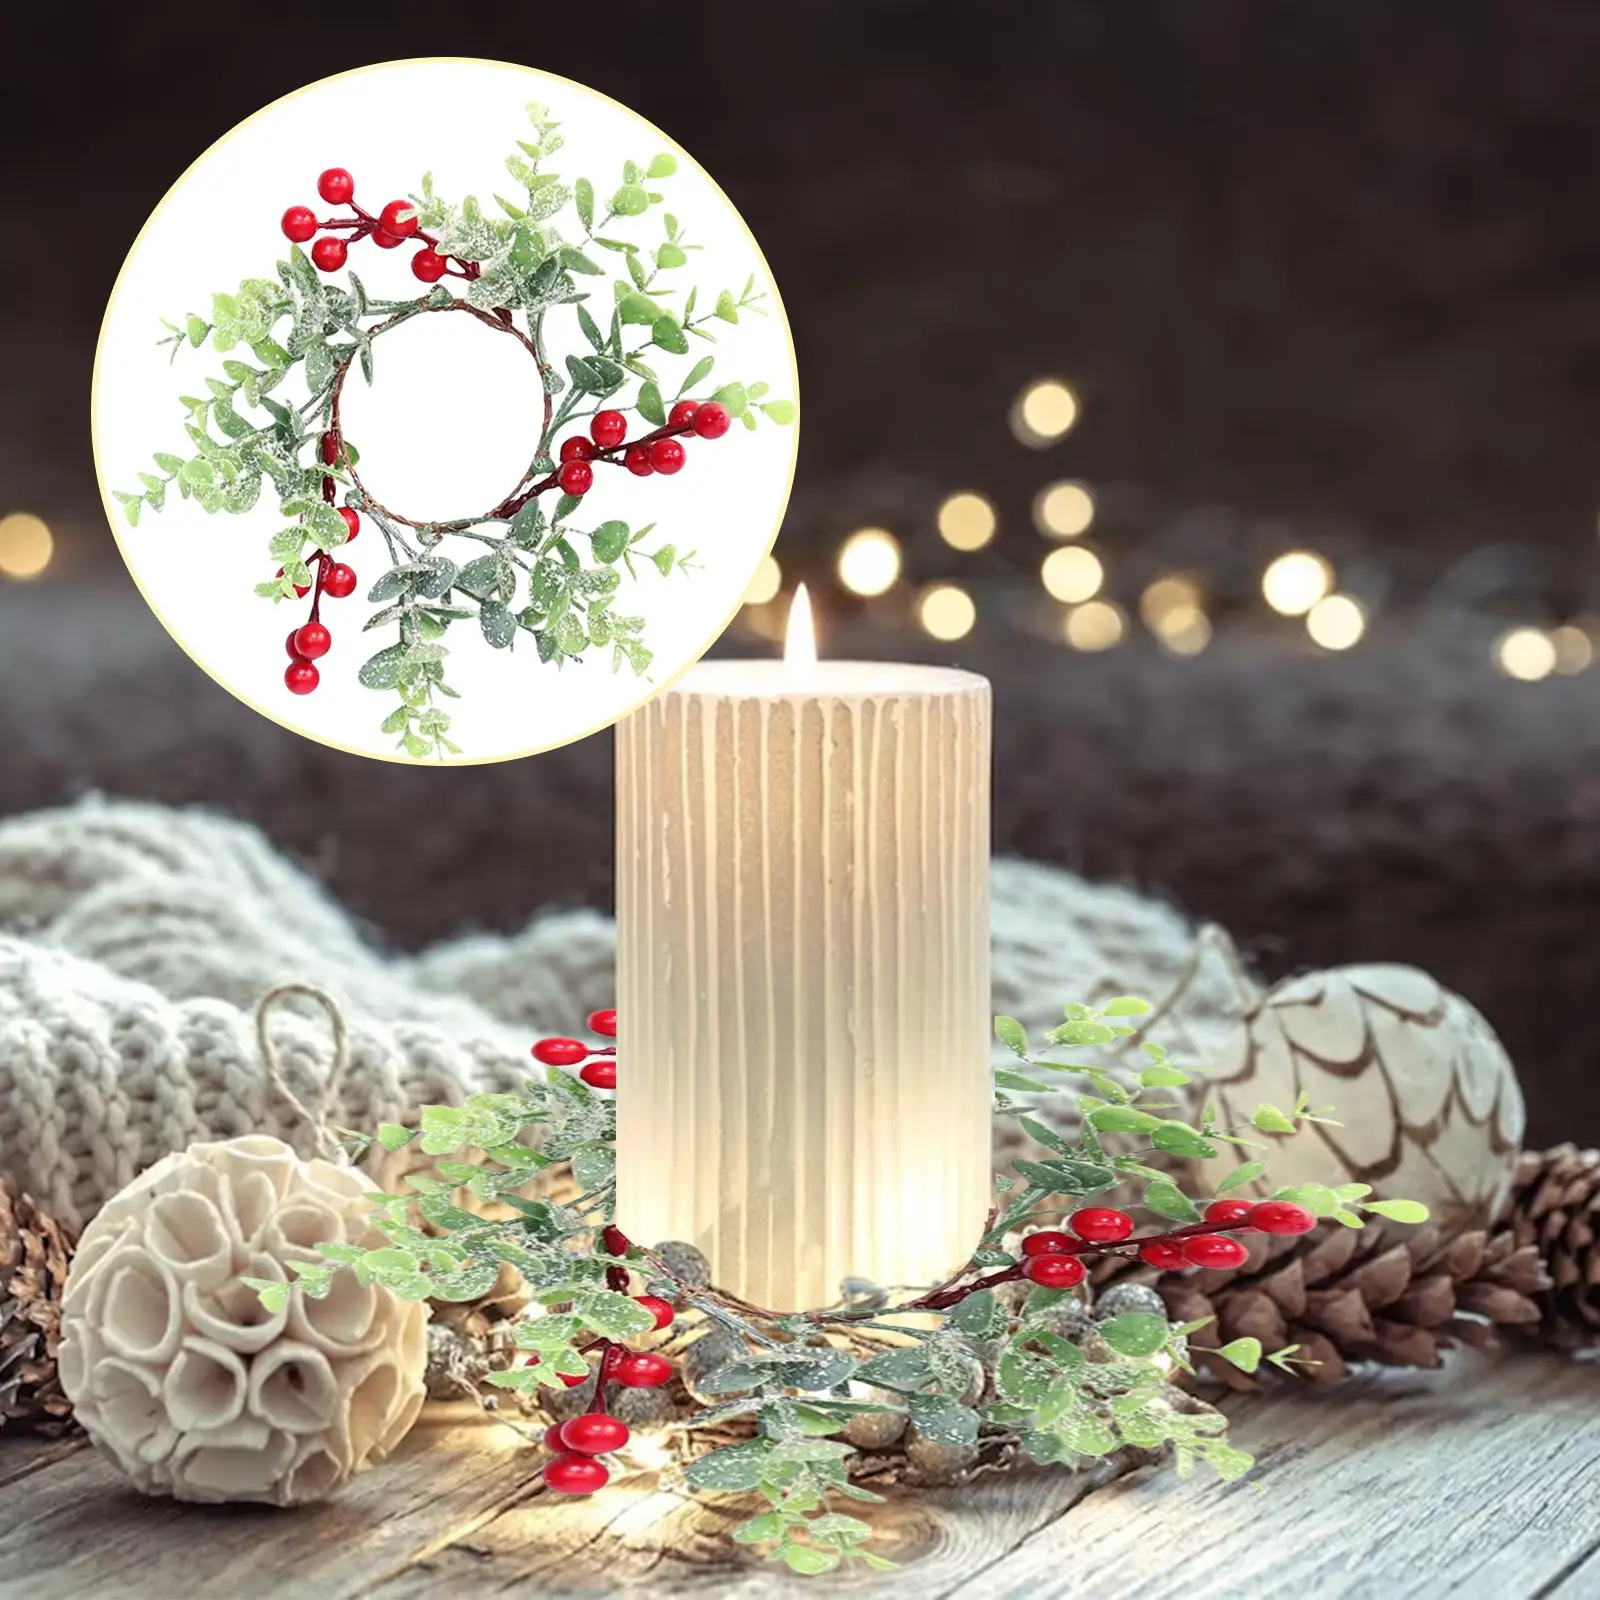 2Pcs Easter Candle Rings, Simulated Decorative Artificial Creative Eucalyptus Wreath for Decorations Wedding Dining Table Door